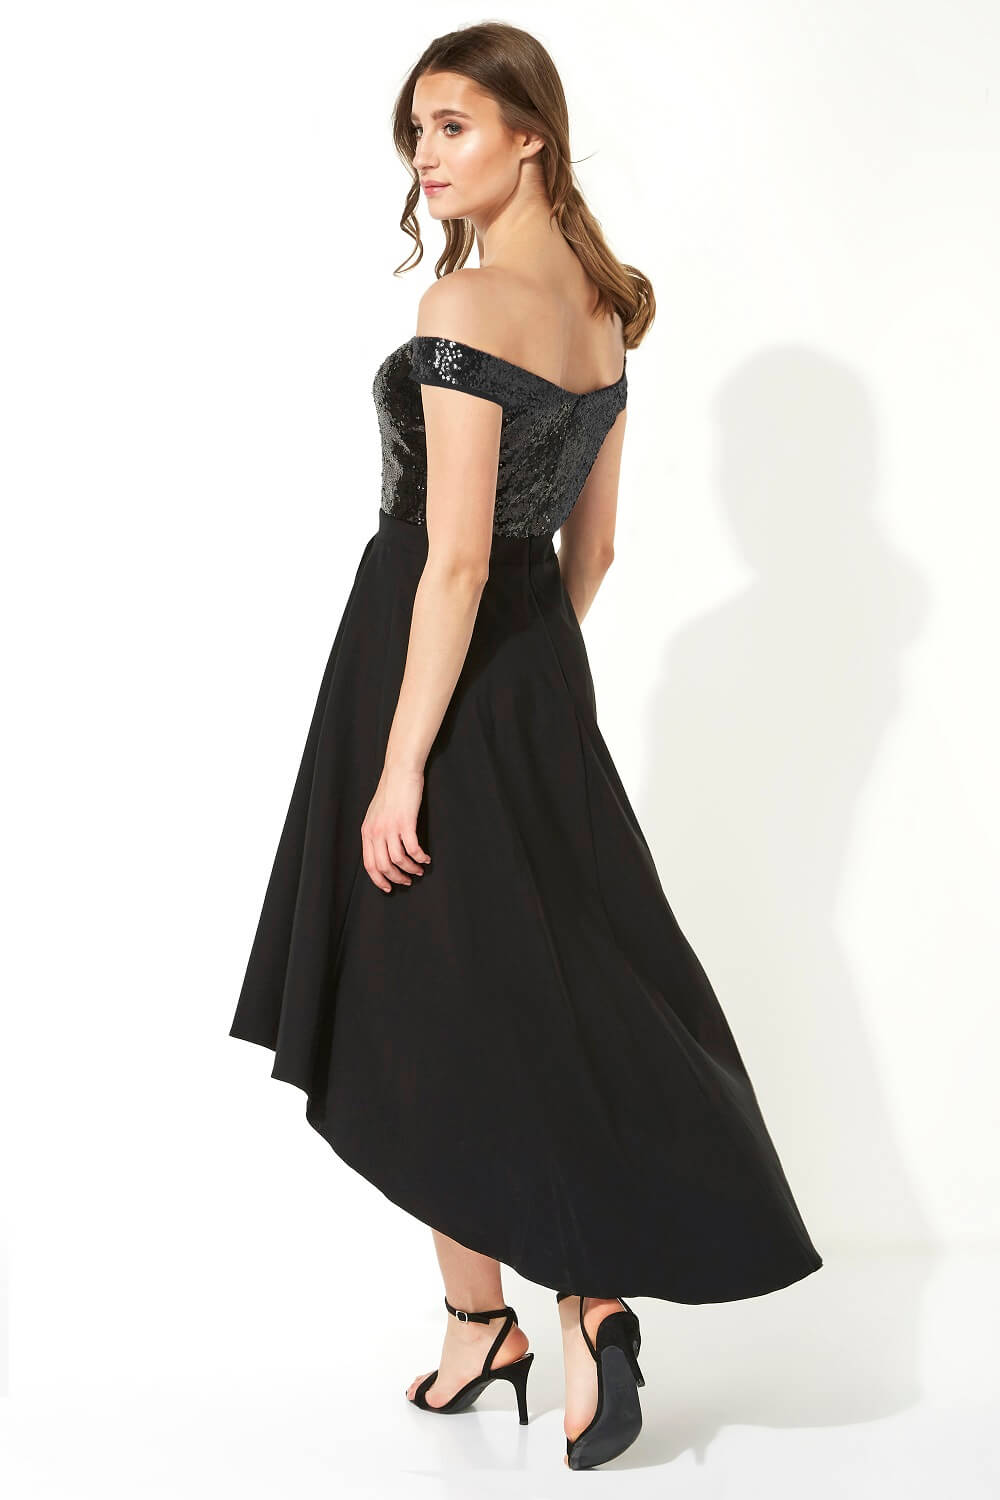 Black Sequin Bardot Gown, Image 2 of 4